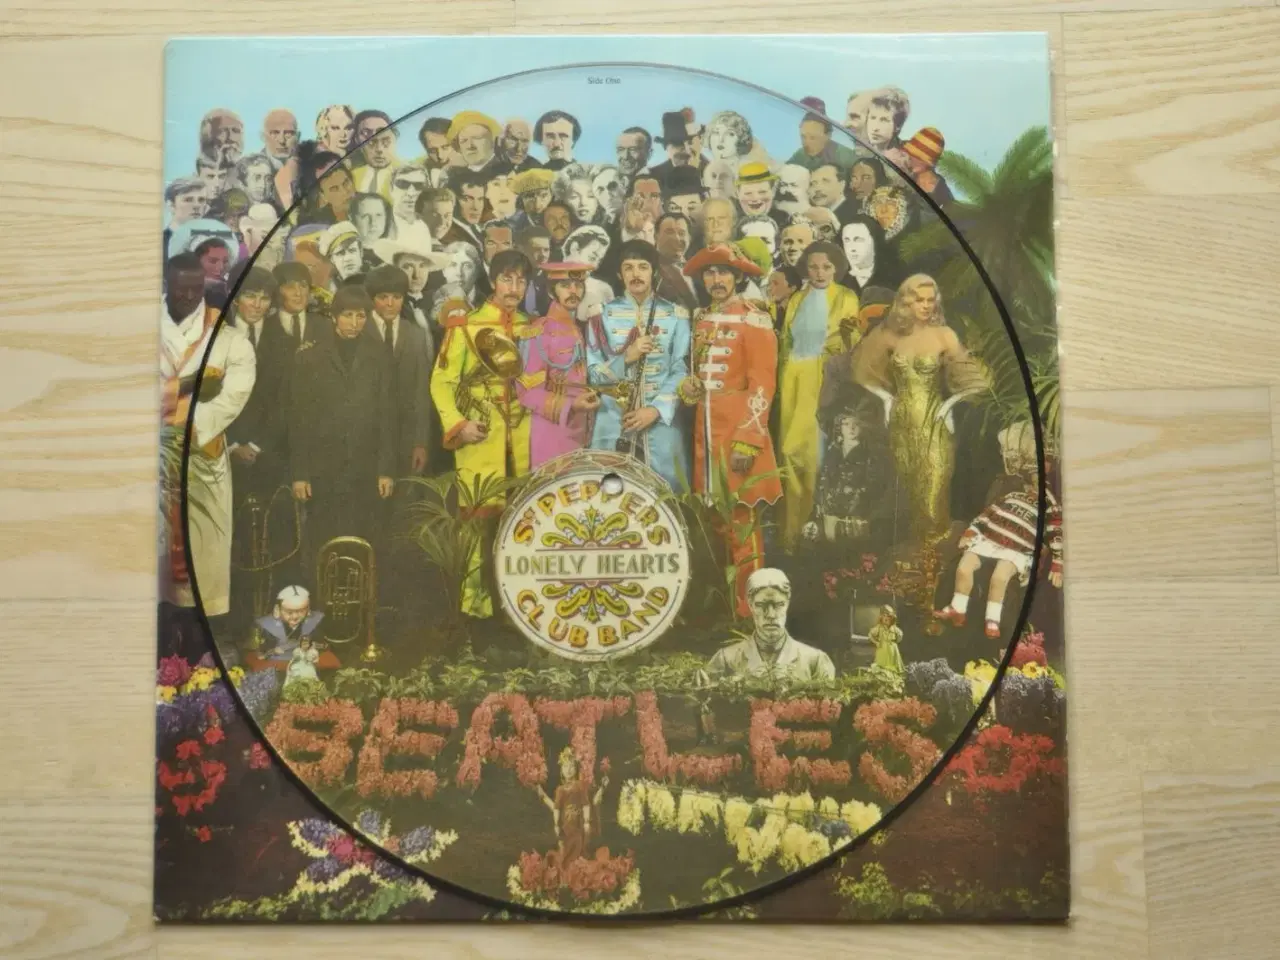 Billede 2 - Sgt. Pepper Lonely Hearts Club Band